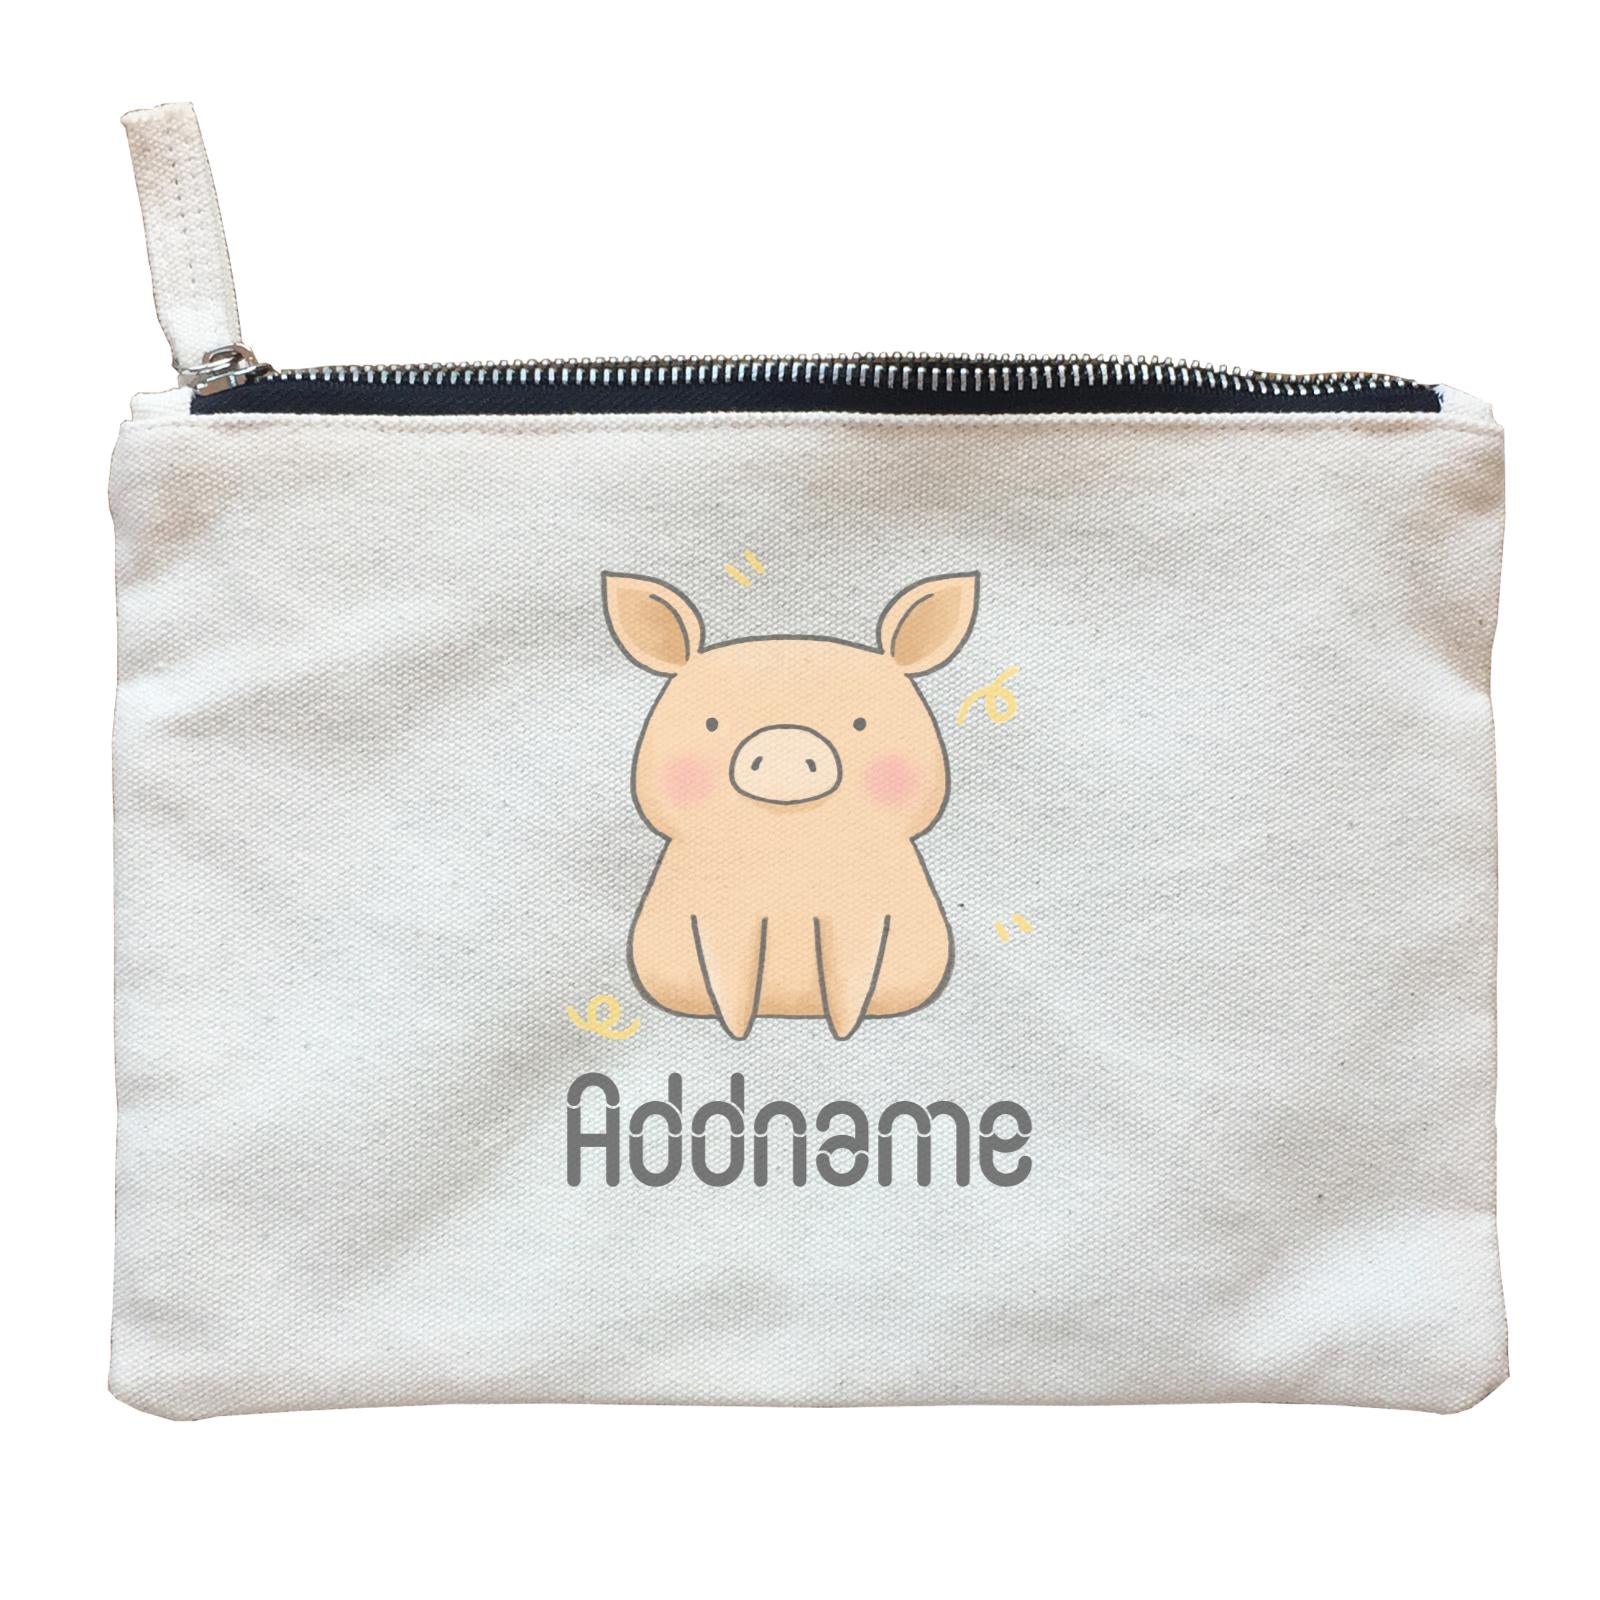 Cute Hand Drawn Style Pig Addname Zipper Pouch